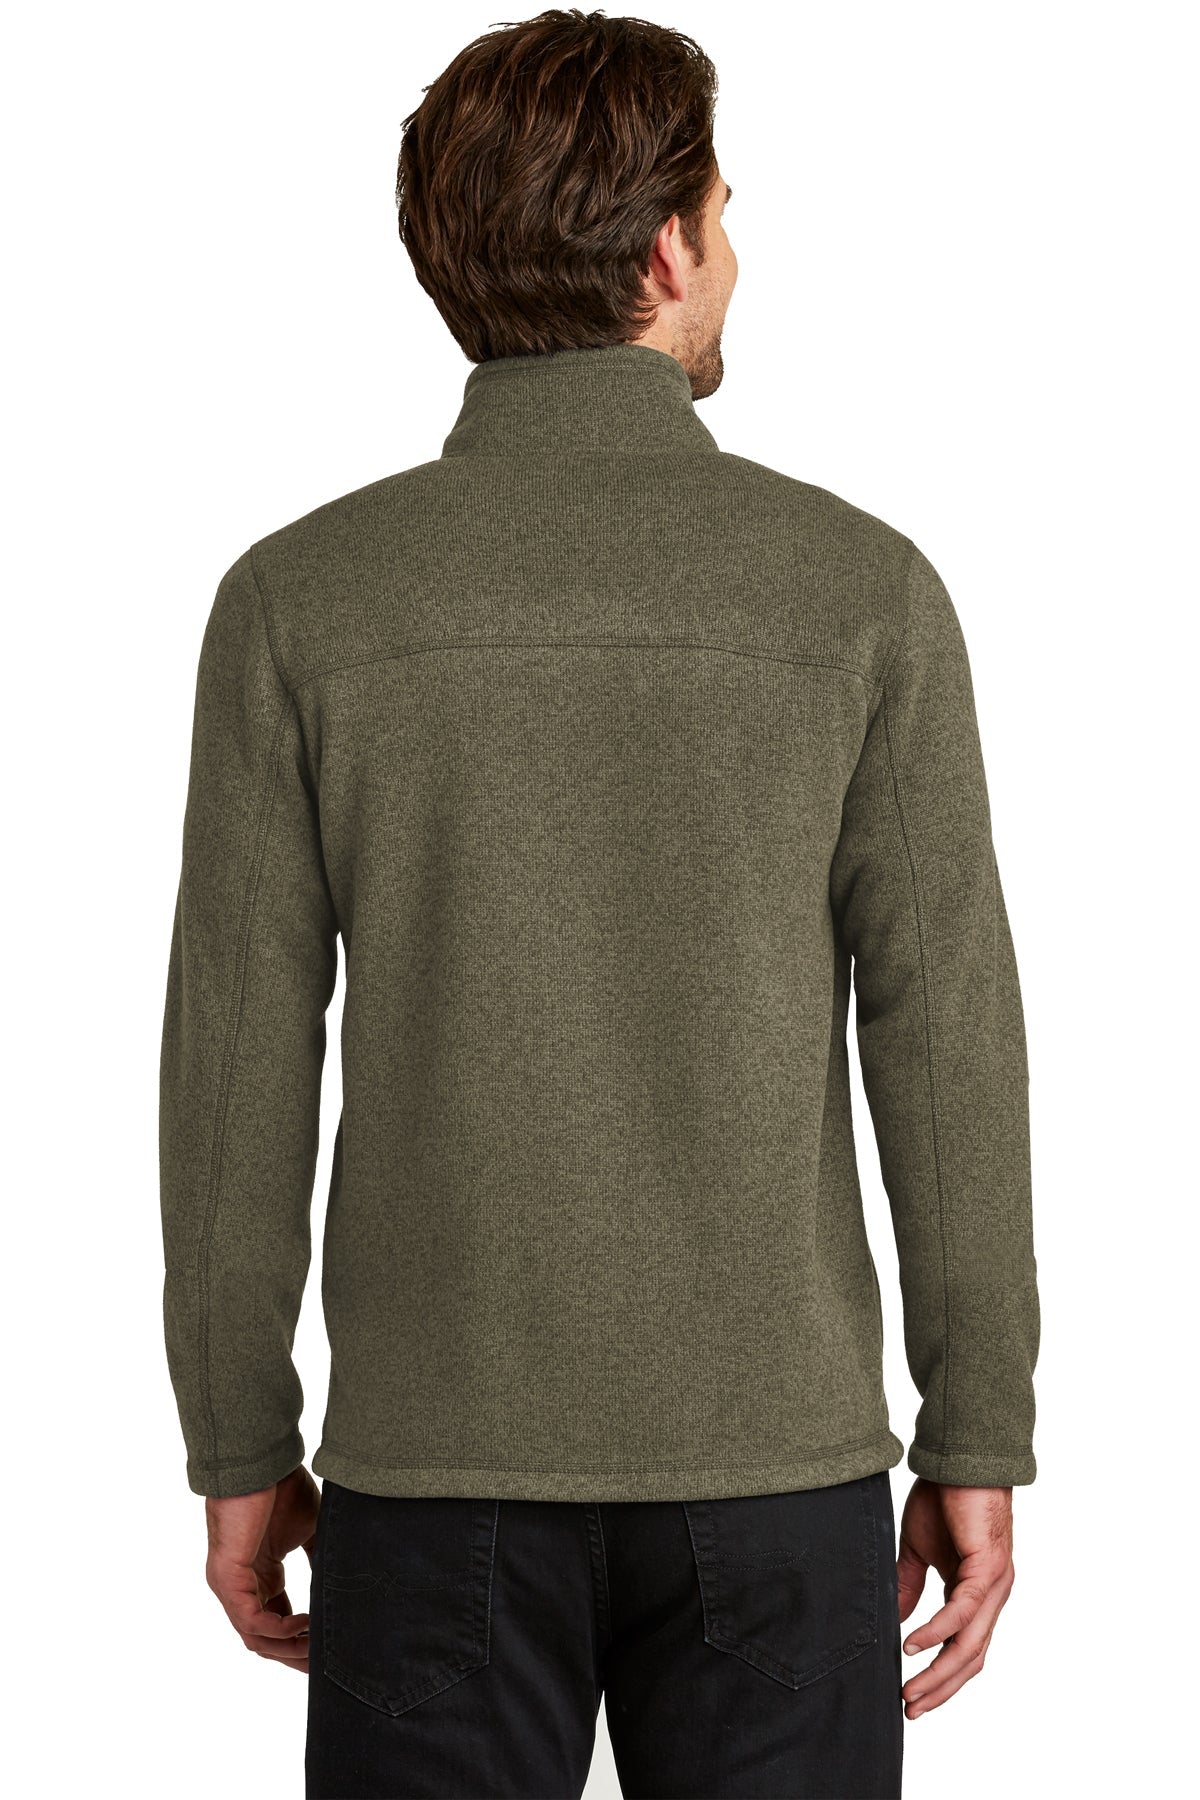 The North Face Sweater Fleece Jacket New Taupe Green Heather